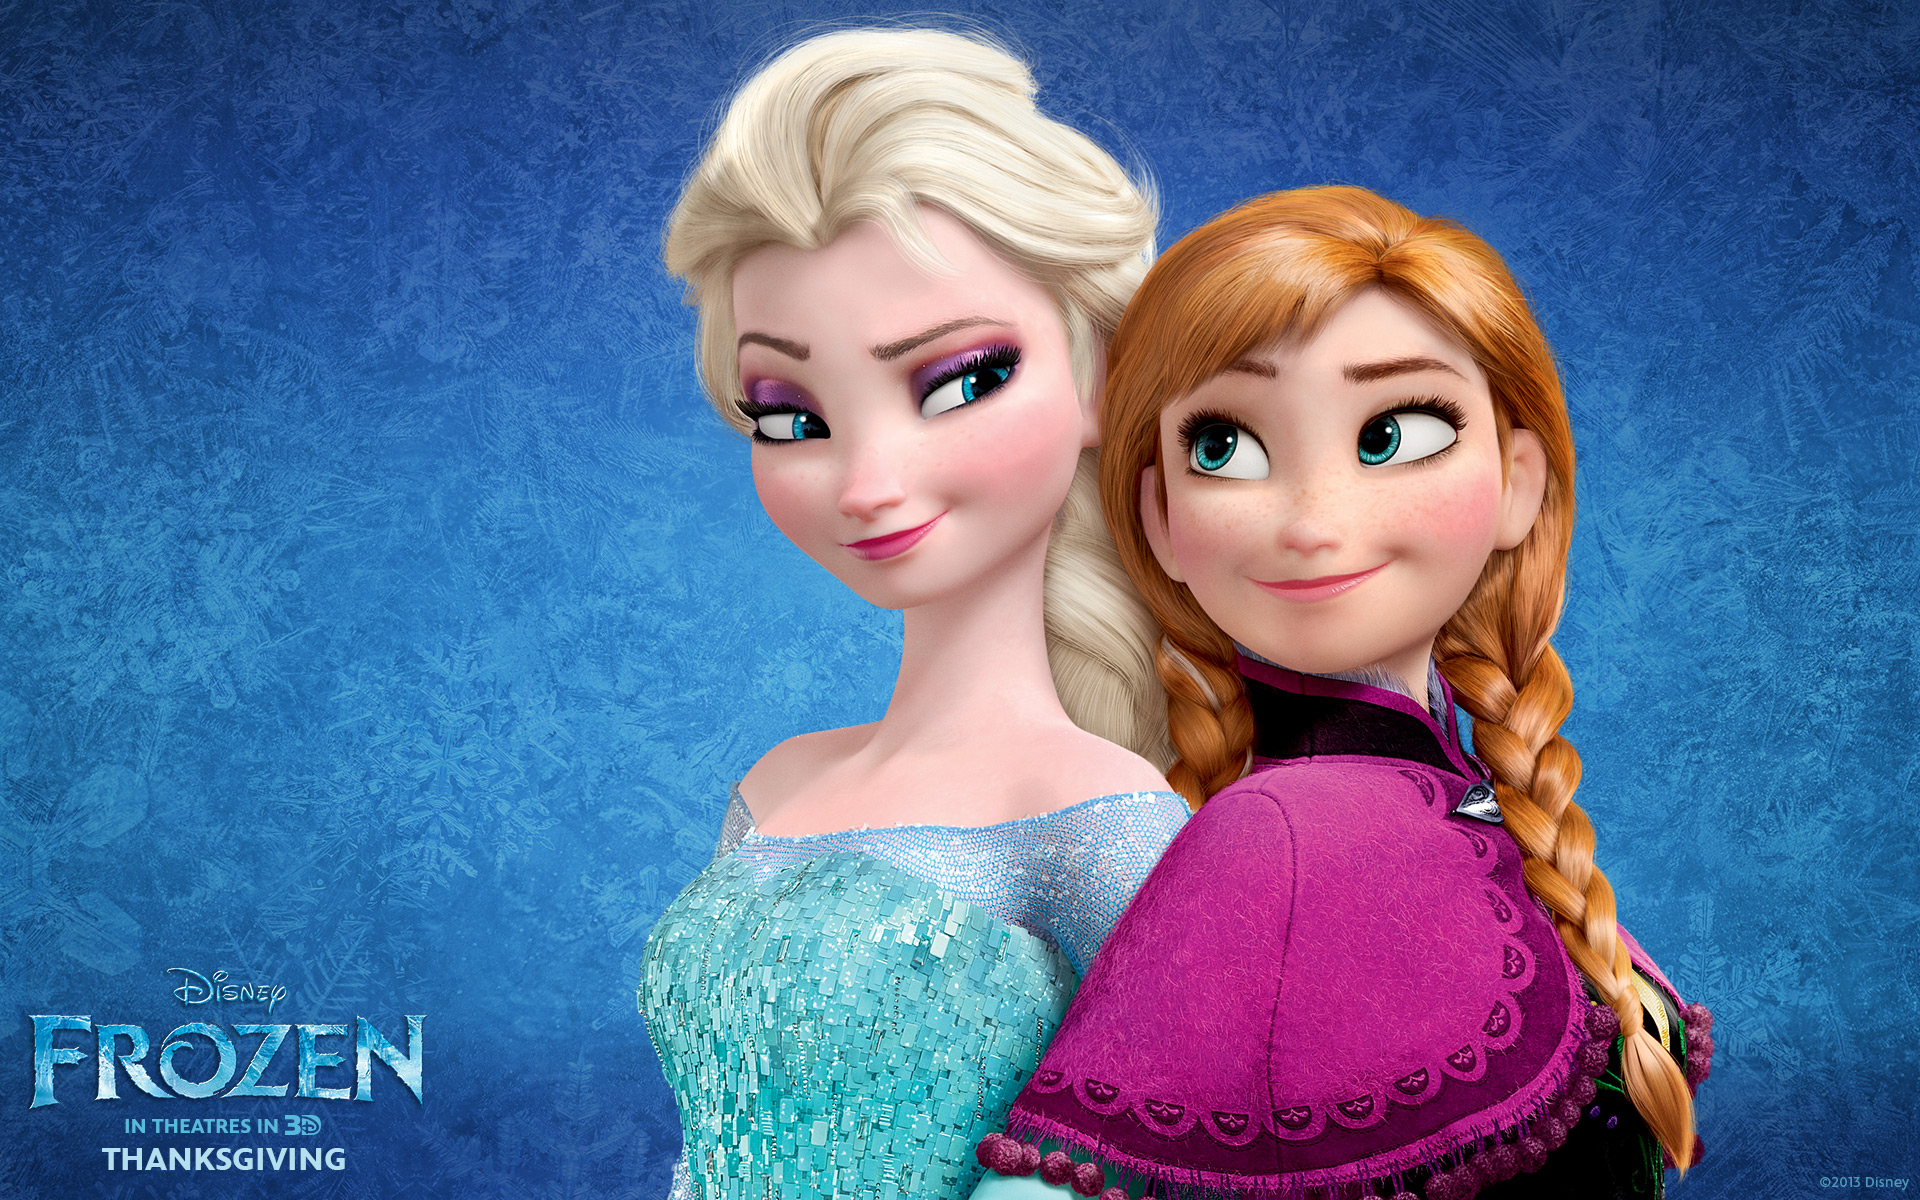  Disneys Frozen wallpaper   Click picture for high resolution HD